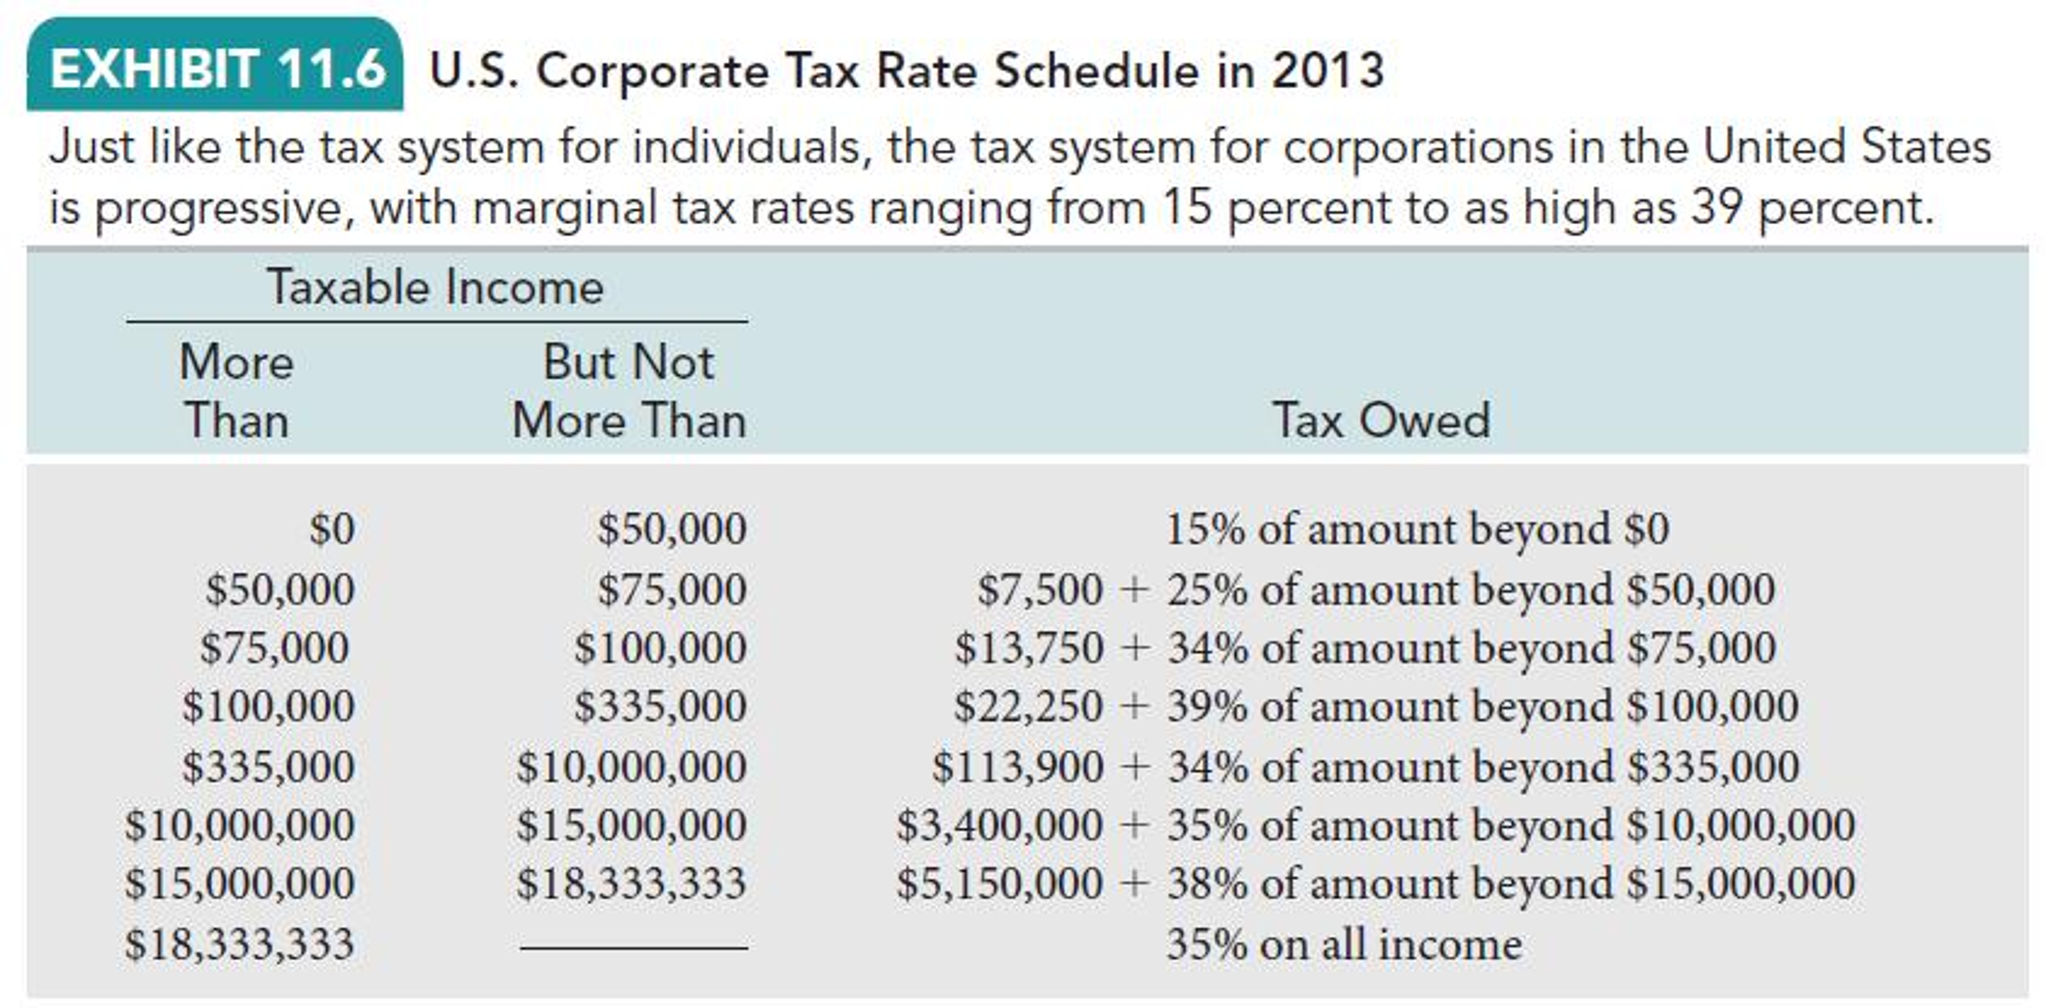 Solved Given the U.S. Corporate Tax Rate Schedule shown